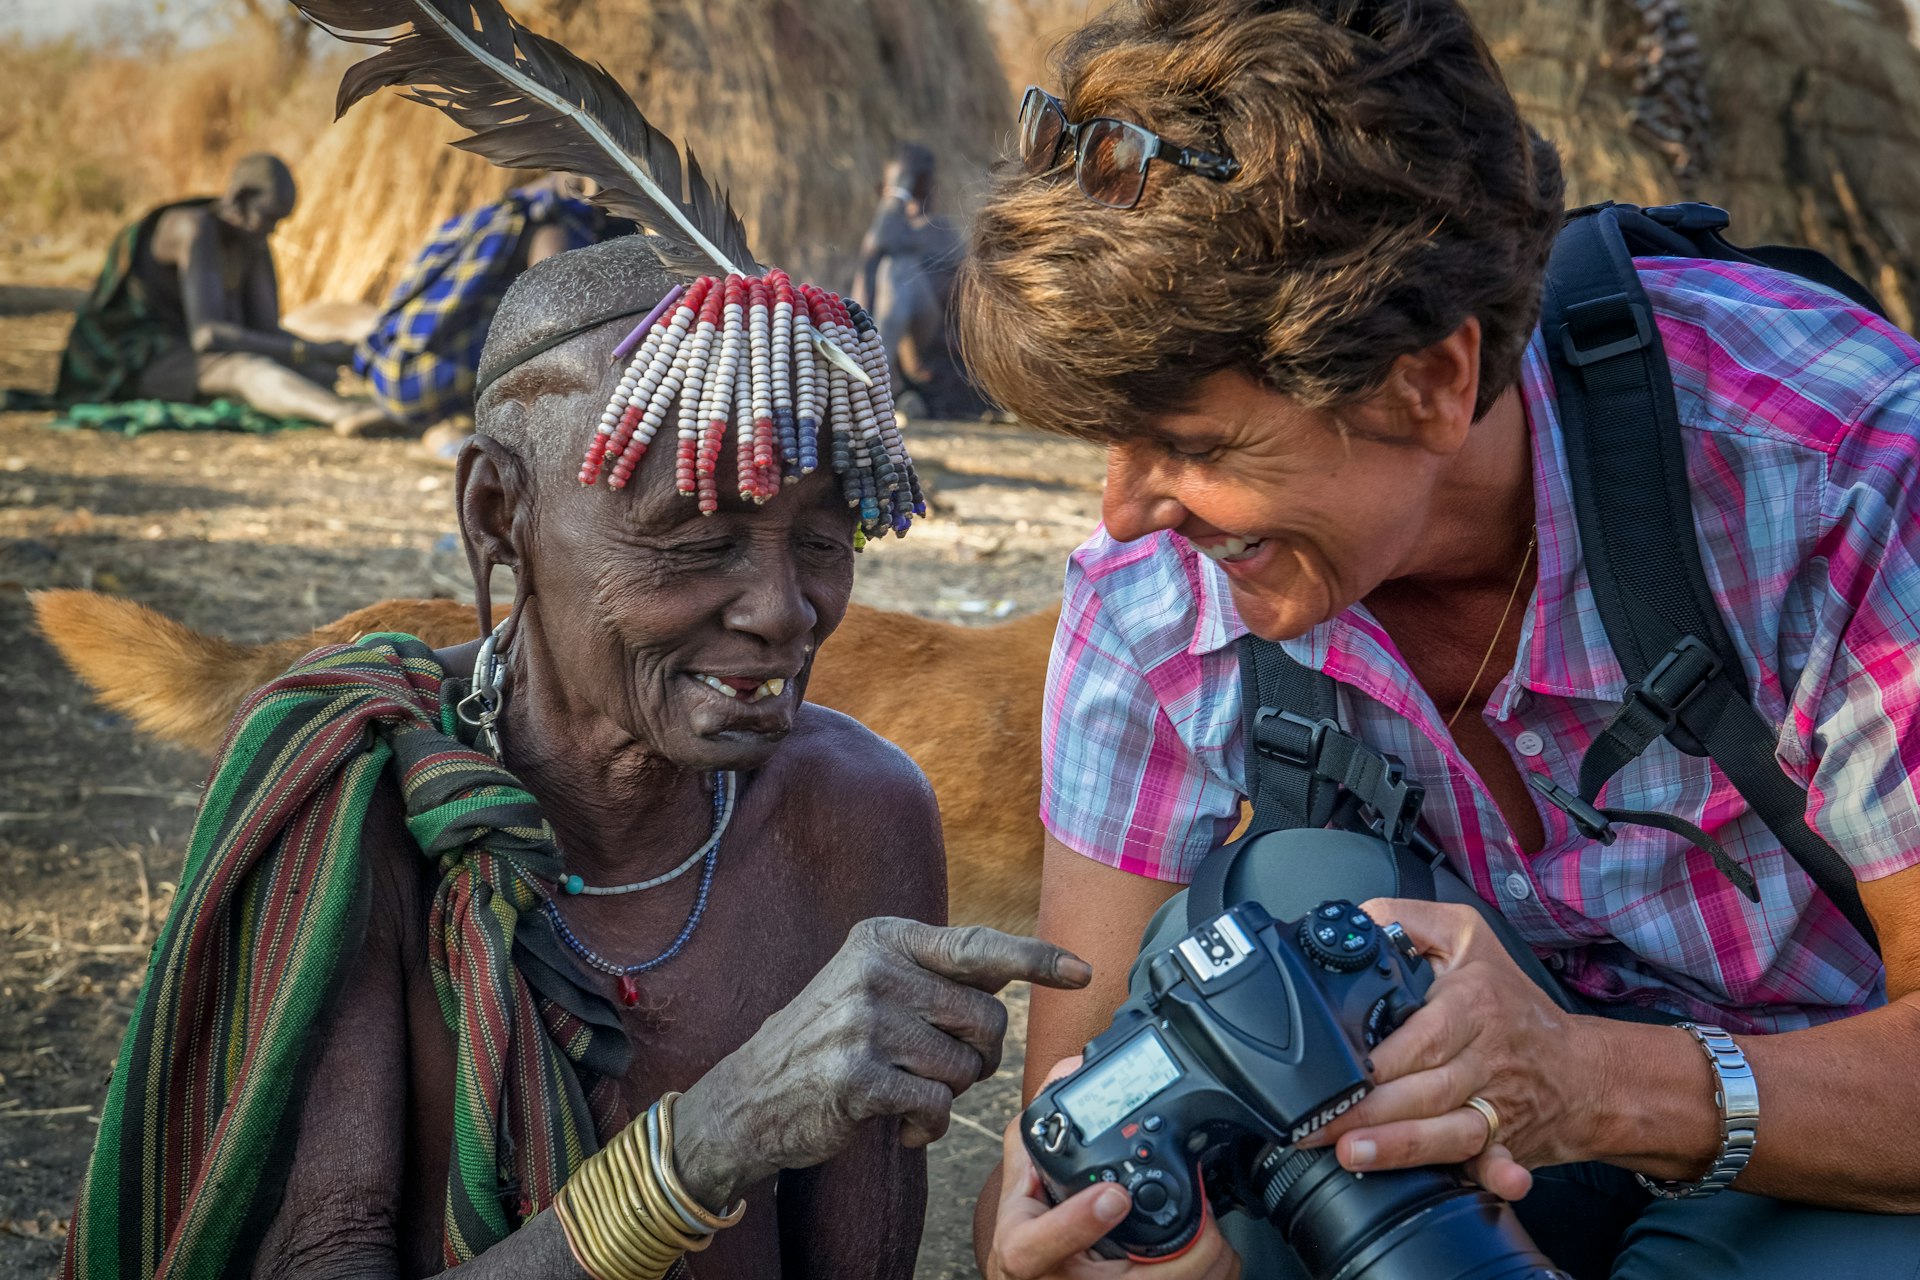 The photographer shows her camera to a tribal elder